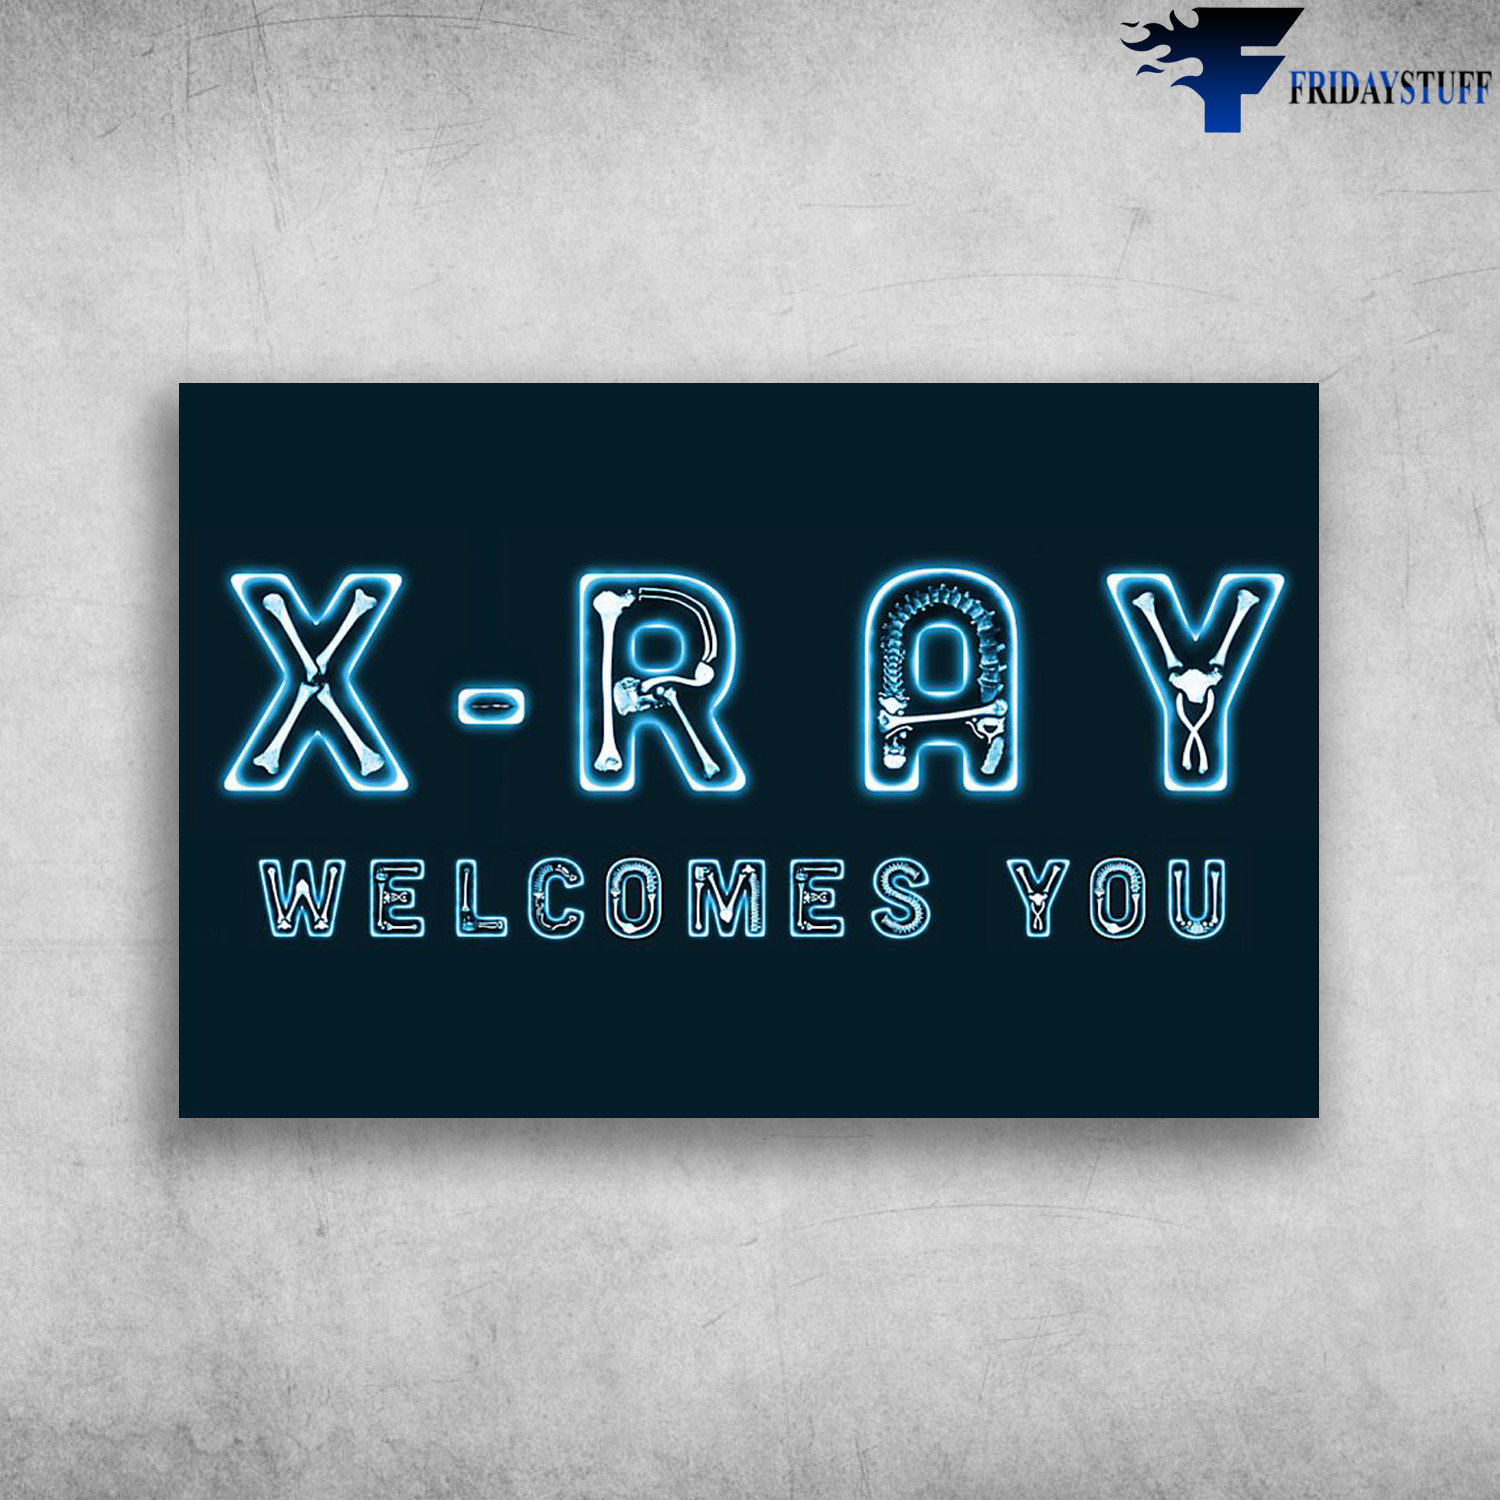 Radiologist Community X Ray Welcomes You